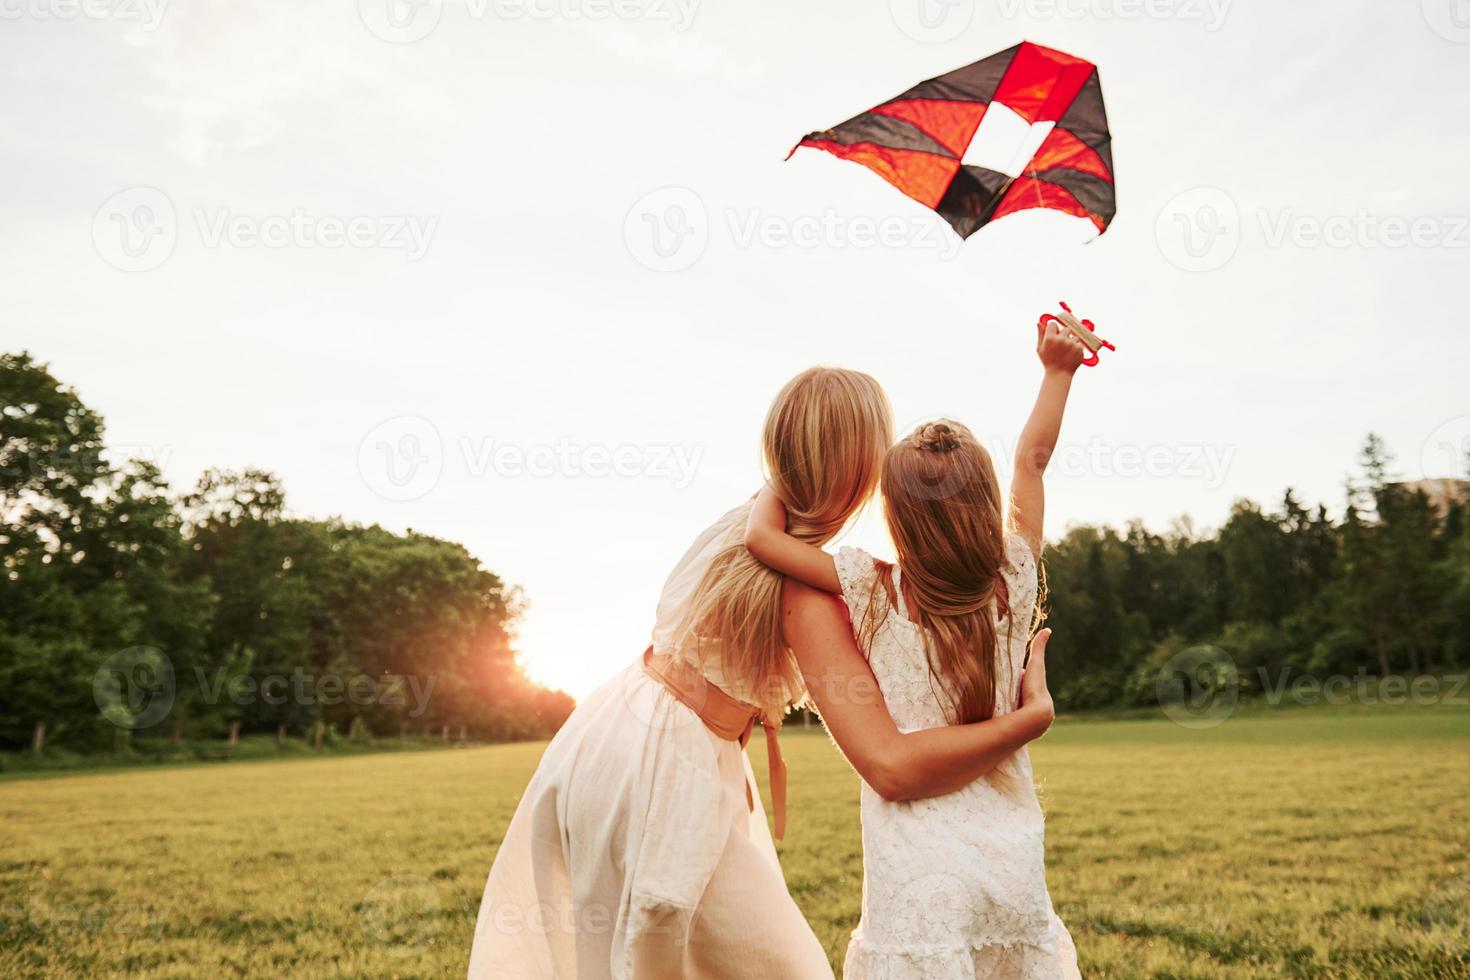 Watching the sky. Mother and daughter have fun with kite in the field. Beautiful nature photo